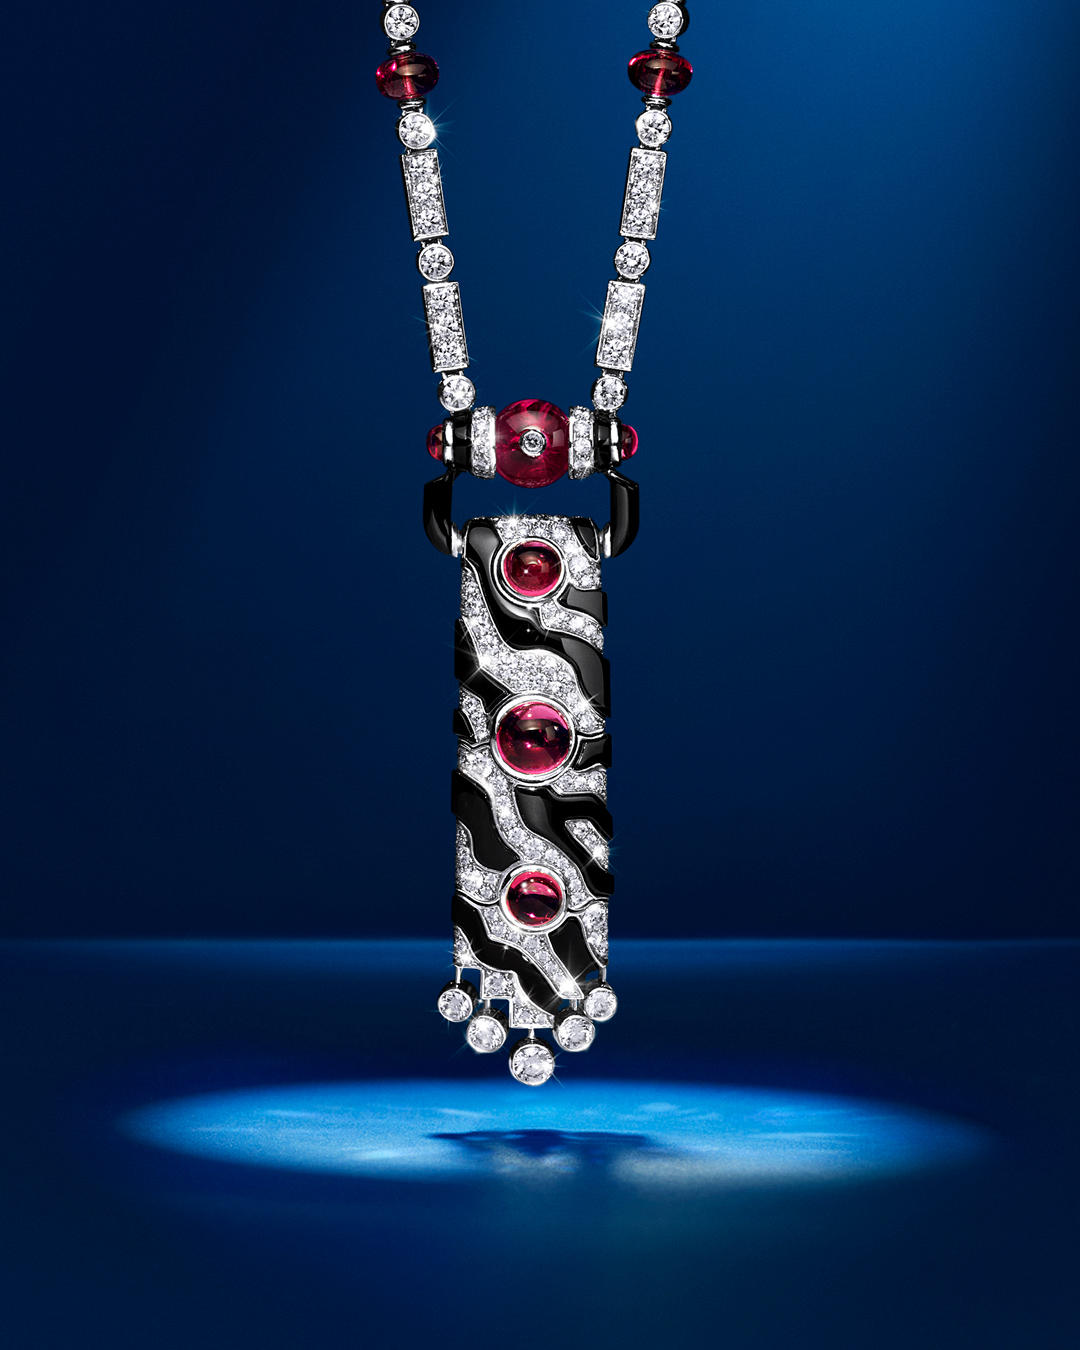 Cartier Official - A chromatic palette of onyx and rubellite gives a powerful rhythm to this #Cartie